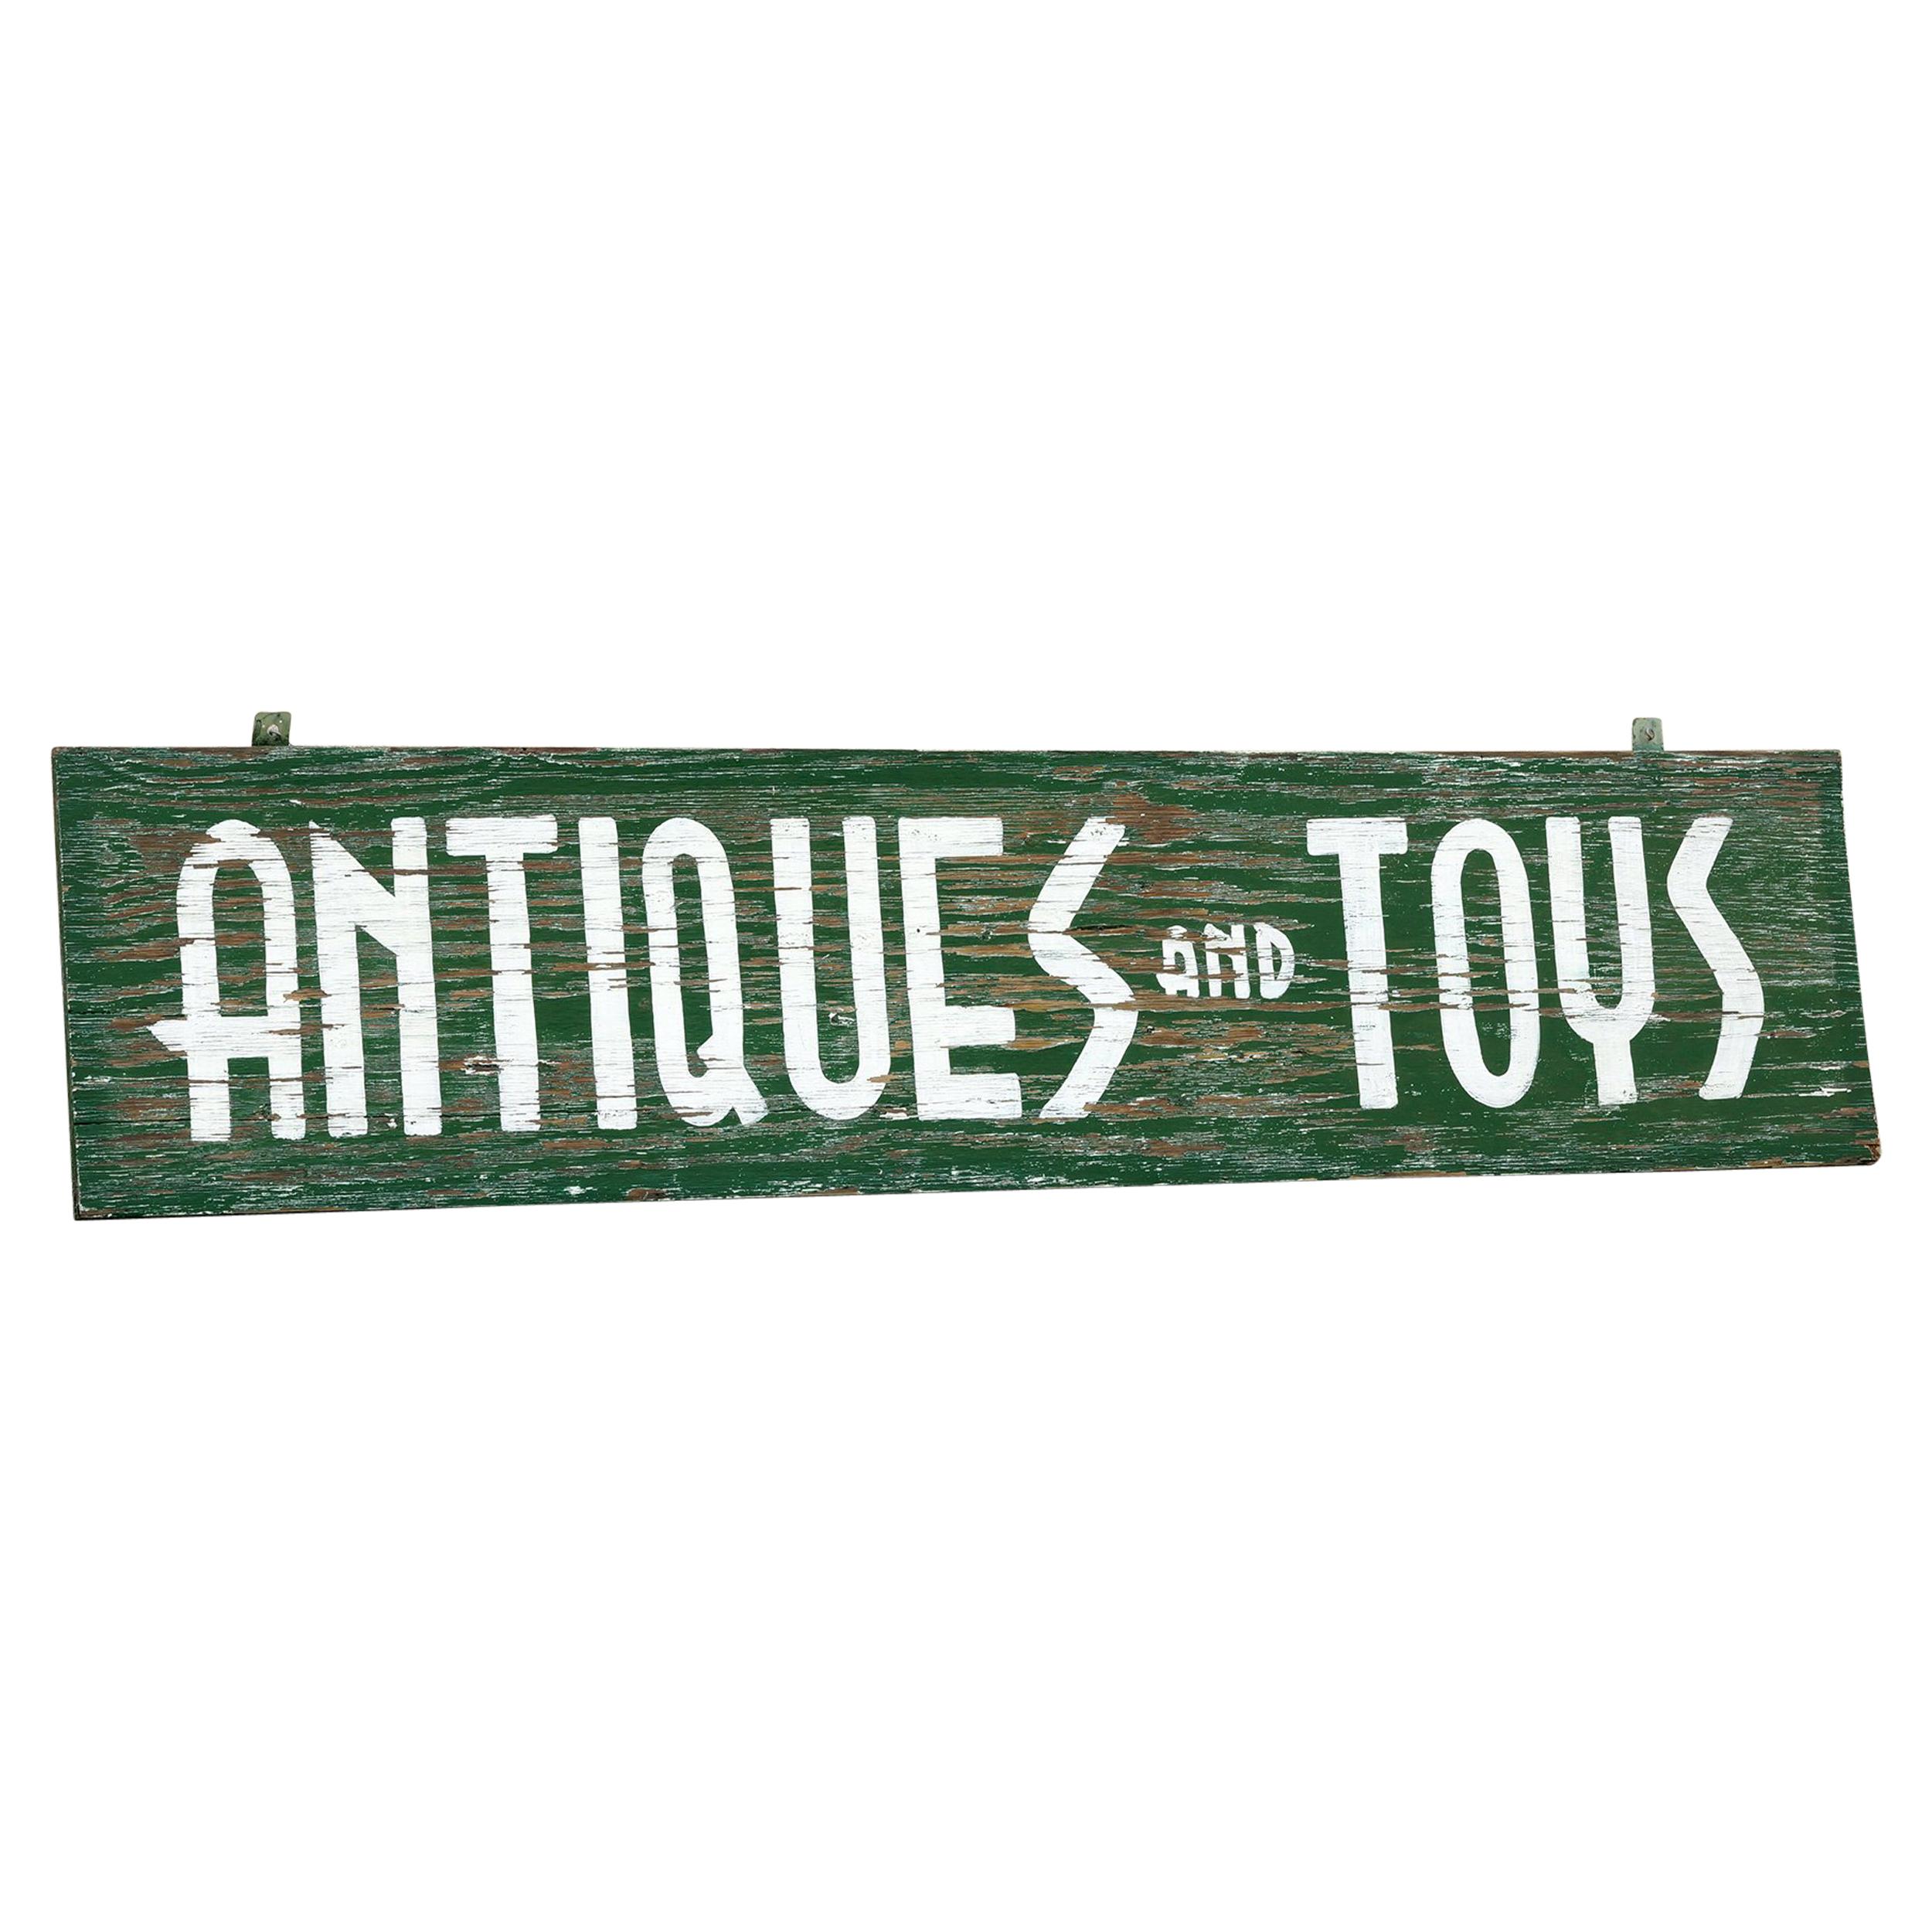 Extra Large Sign From Antiques and Toys Storefront, Hand-Painted For Sale